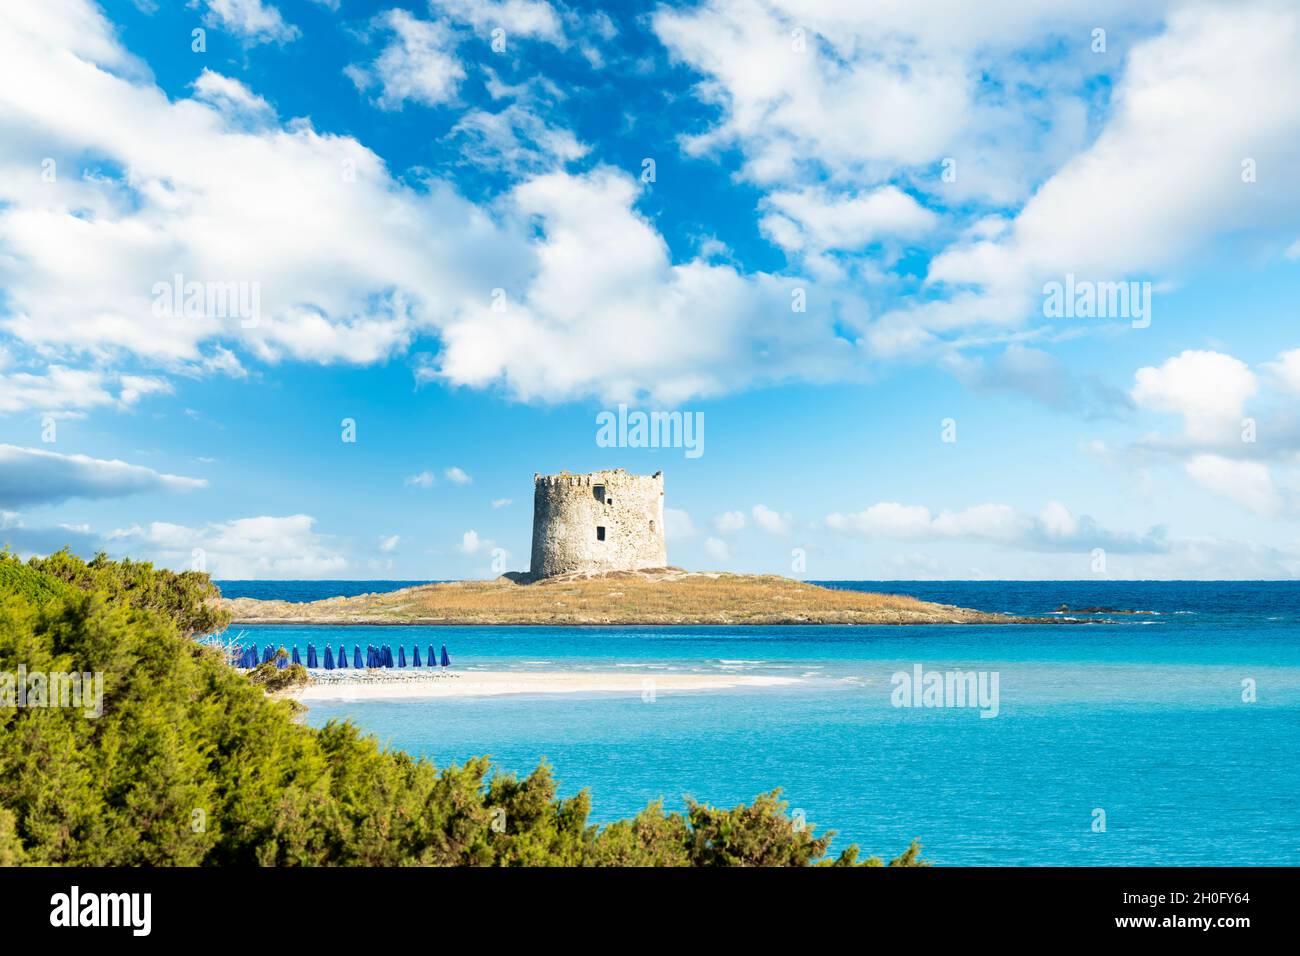 Stunning landscape with the Aragonese Tower and La Pelosa Beach bathed by a calm turquoise water. Spiaggia La Pelosa, Stintino, north-west Sardinia. Stock Photo